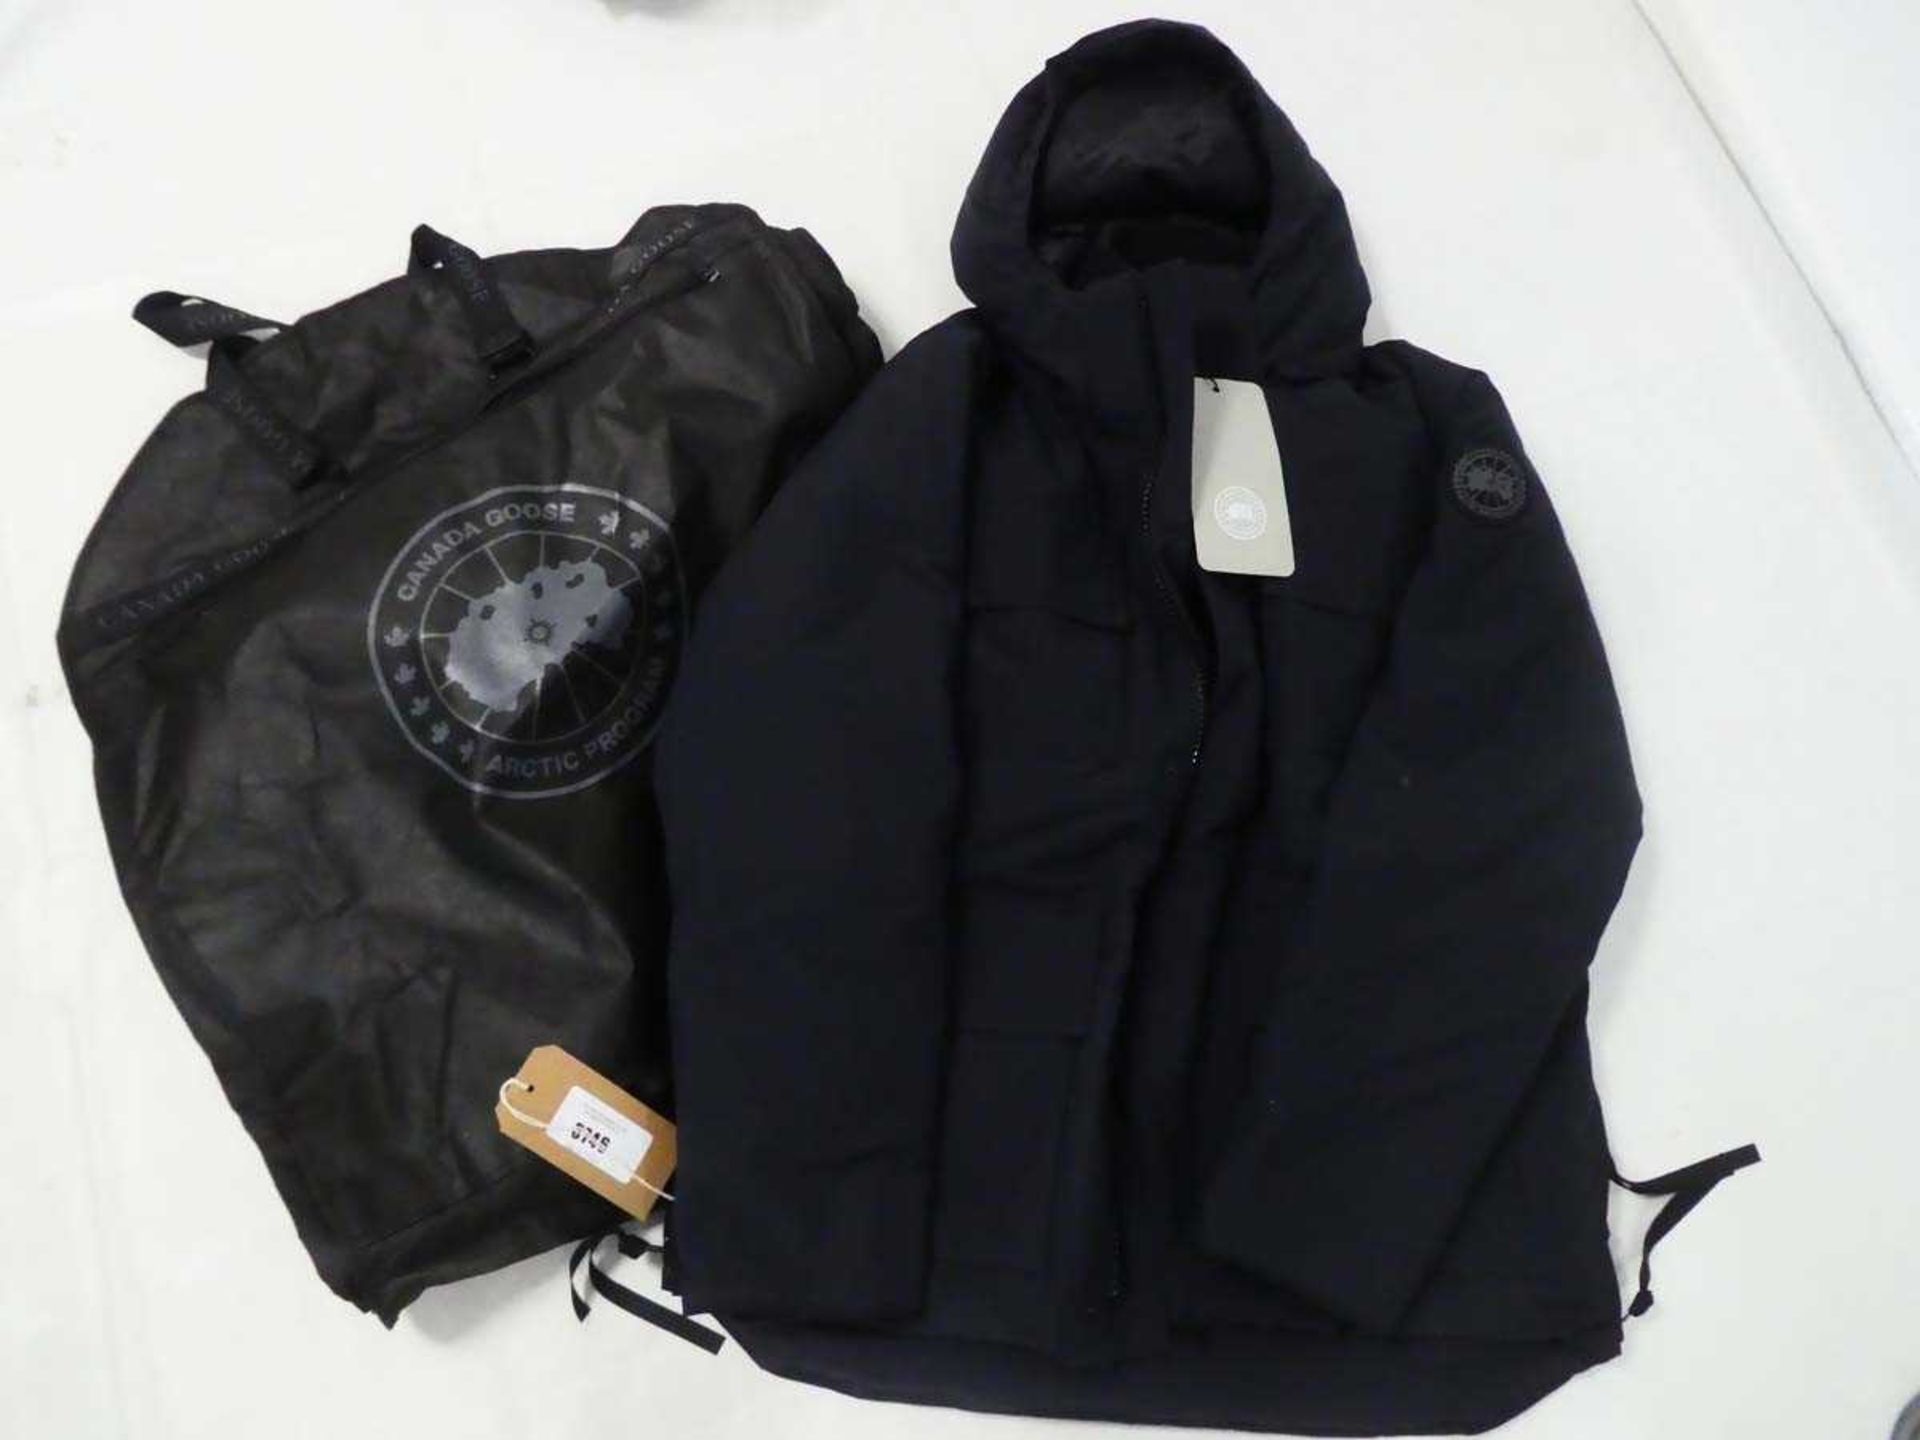 +VAT Canada Goose maitland parka in black disc size XL with garment bag (note- small white mark on